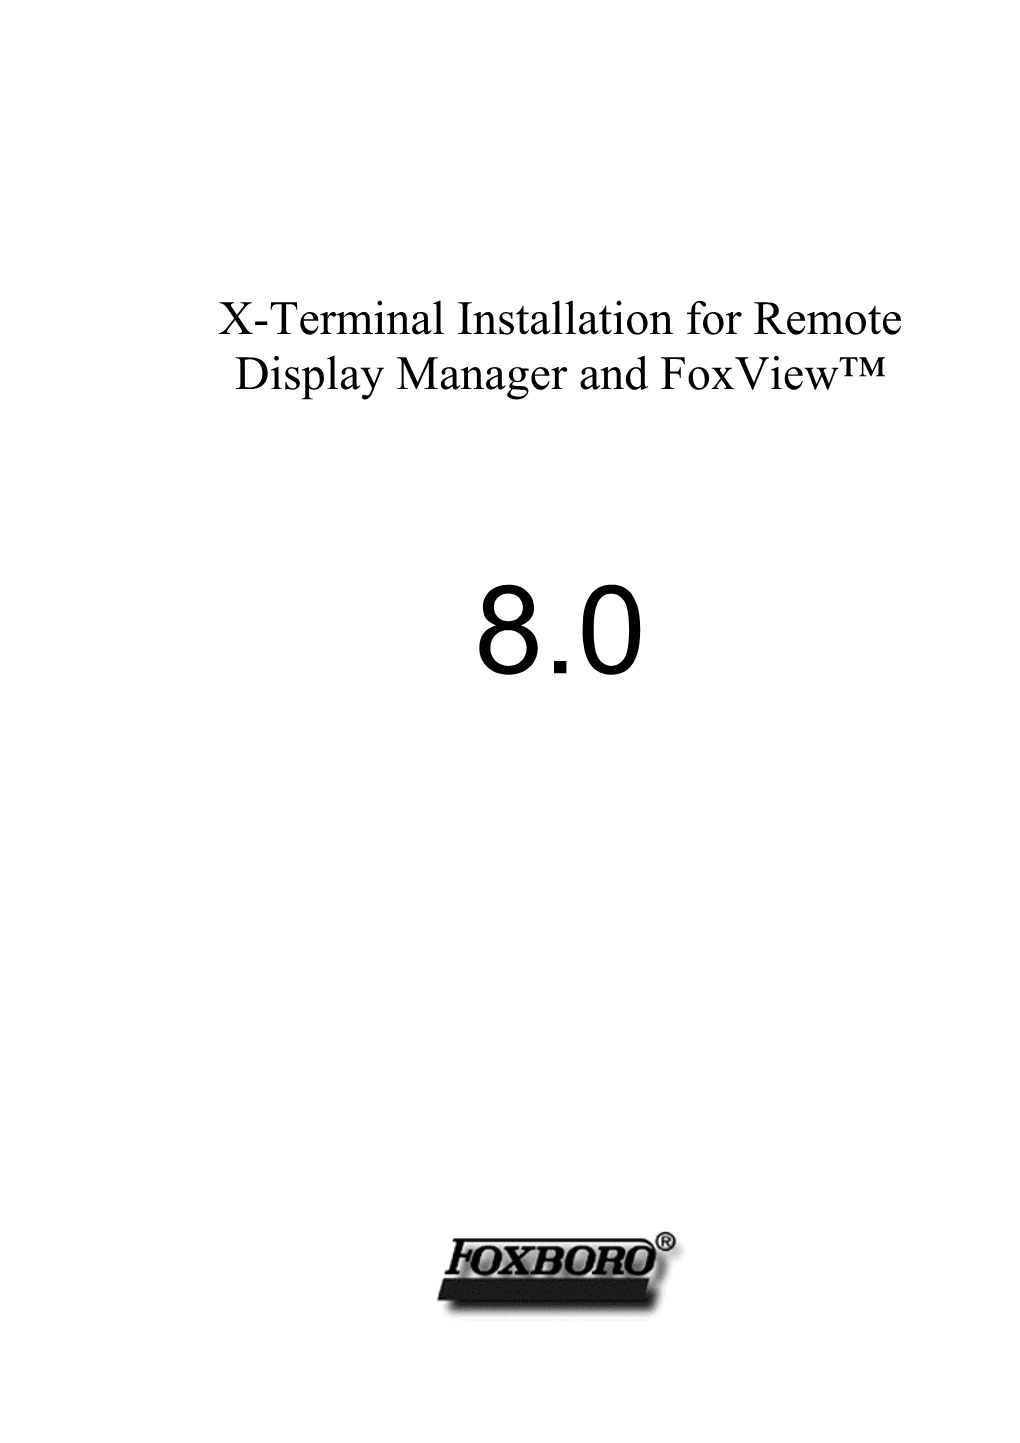 X-Terminal Installation for Remote Display Manager and Foxview™ X-Terminal Installation for Remote Display Manager and Foxview™